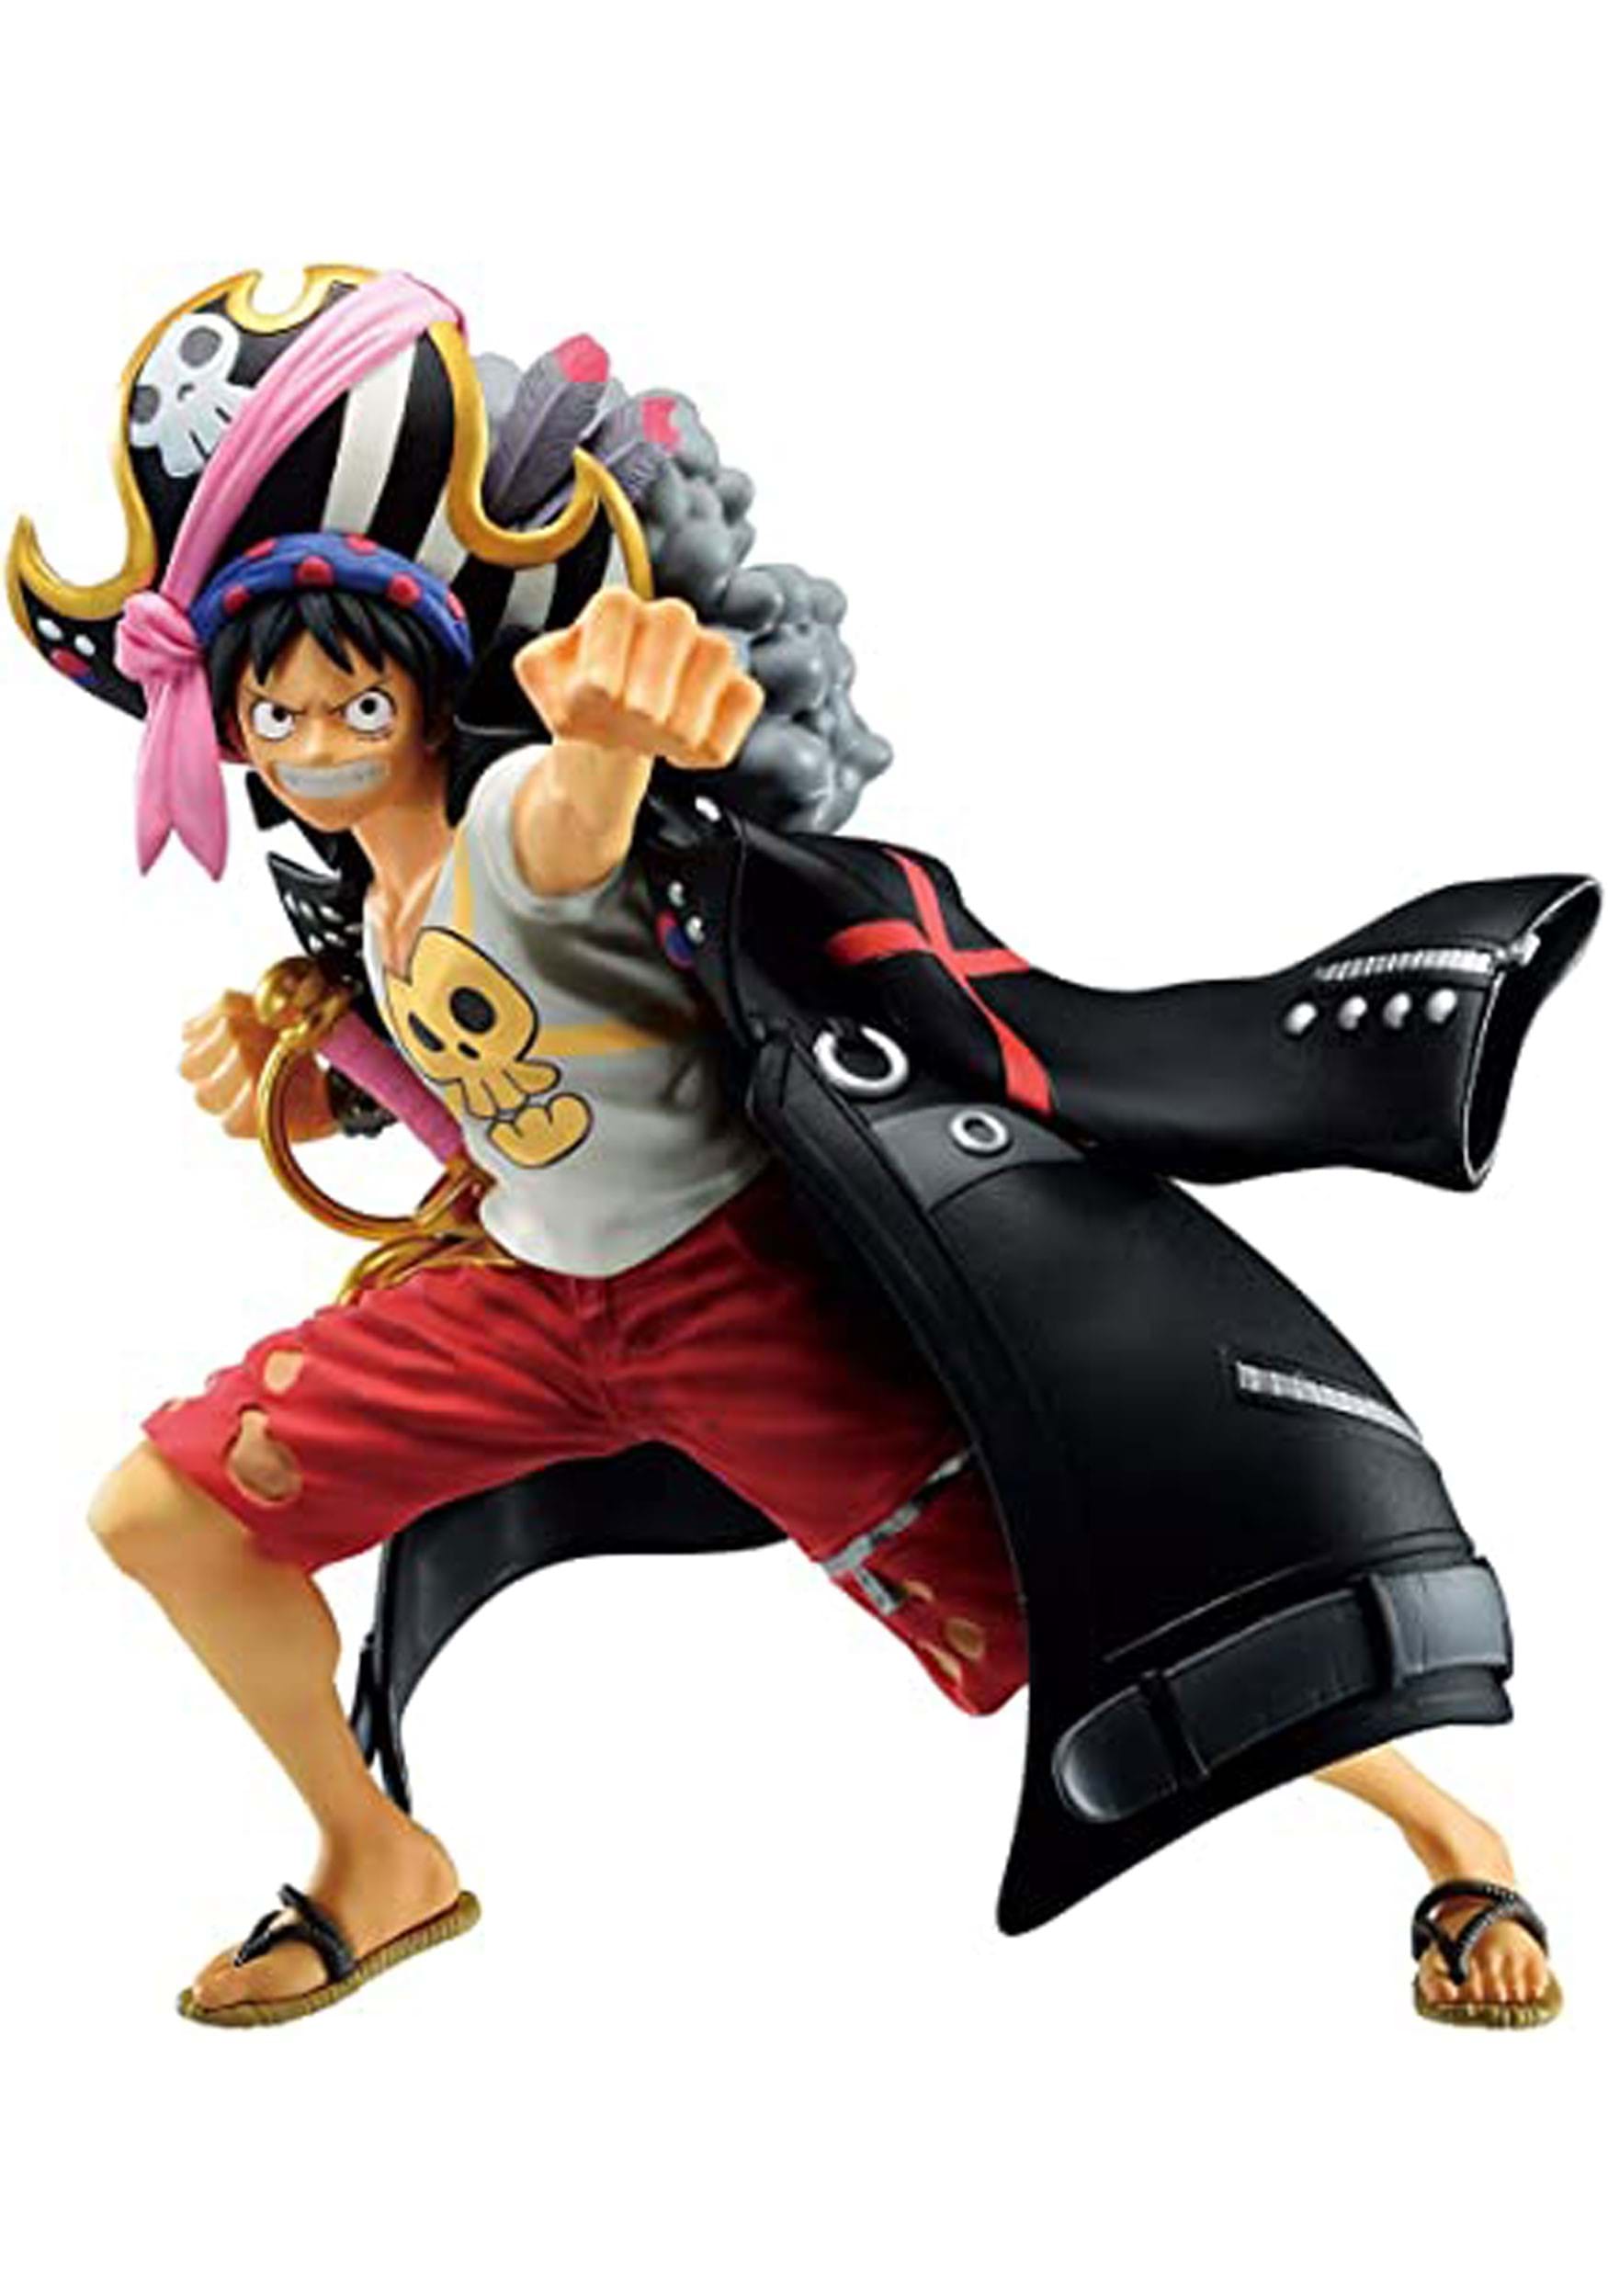 Image of Bandai Bandai One Piece Film: Red Monkey D Luffy Figure for Adults